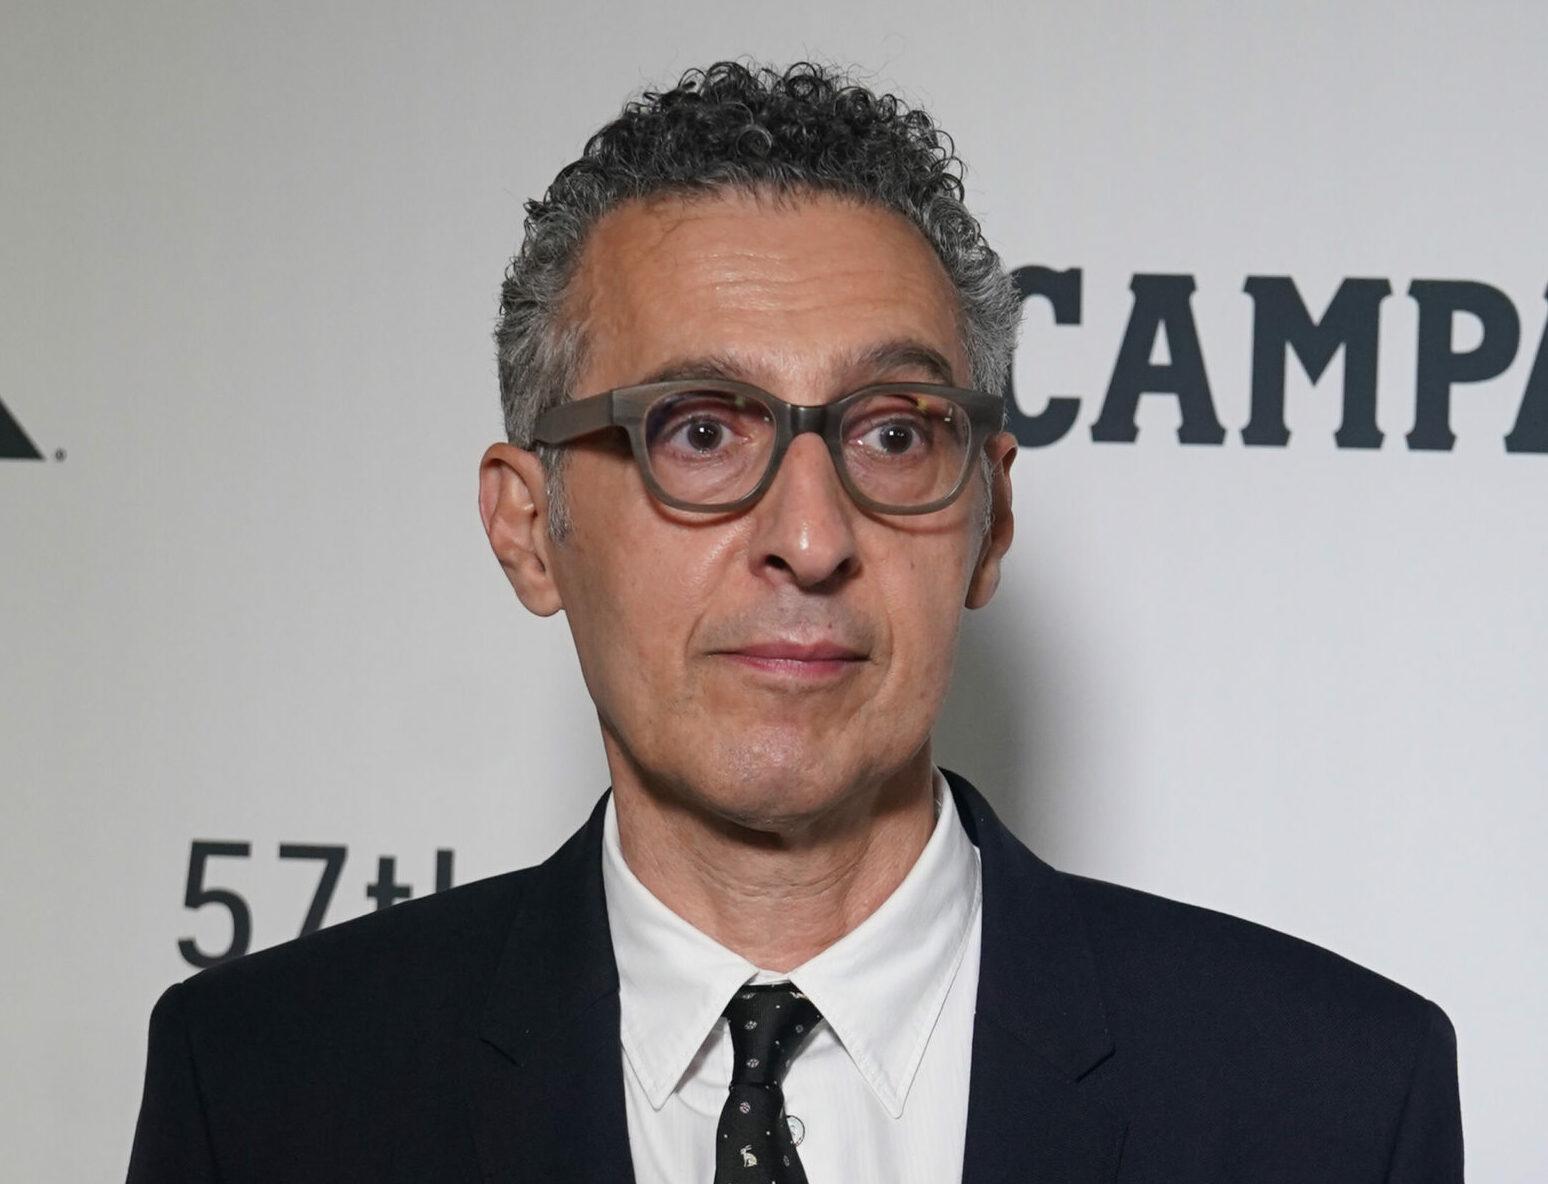 John Turturro arrives on the red carpet at the NYFF57 Opening Night Gala Presentation & World Premiere of The Irishman at Alice Tully Hall on Friday, September 27, 2019 in New York City.